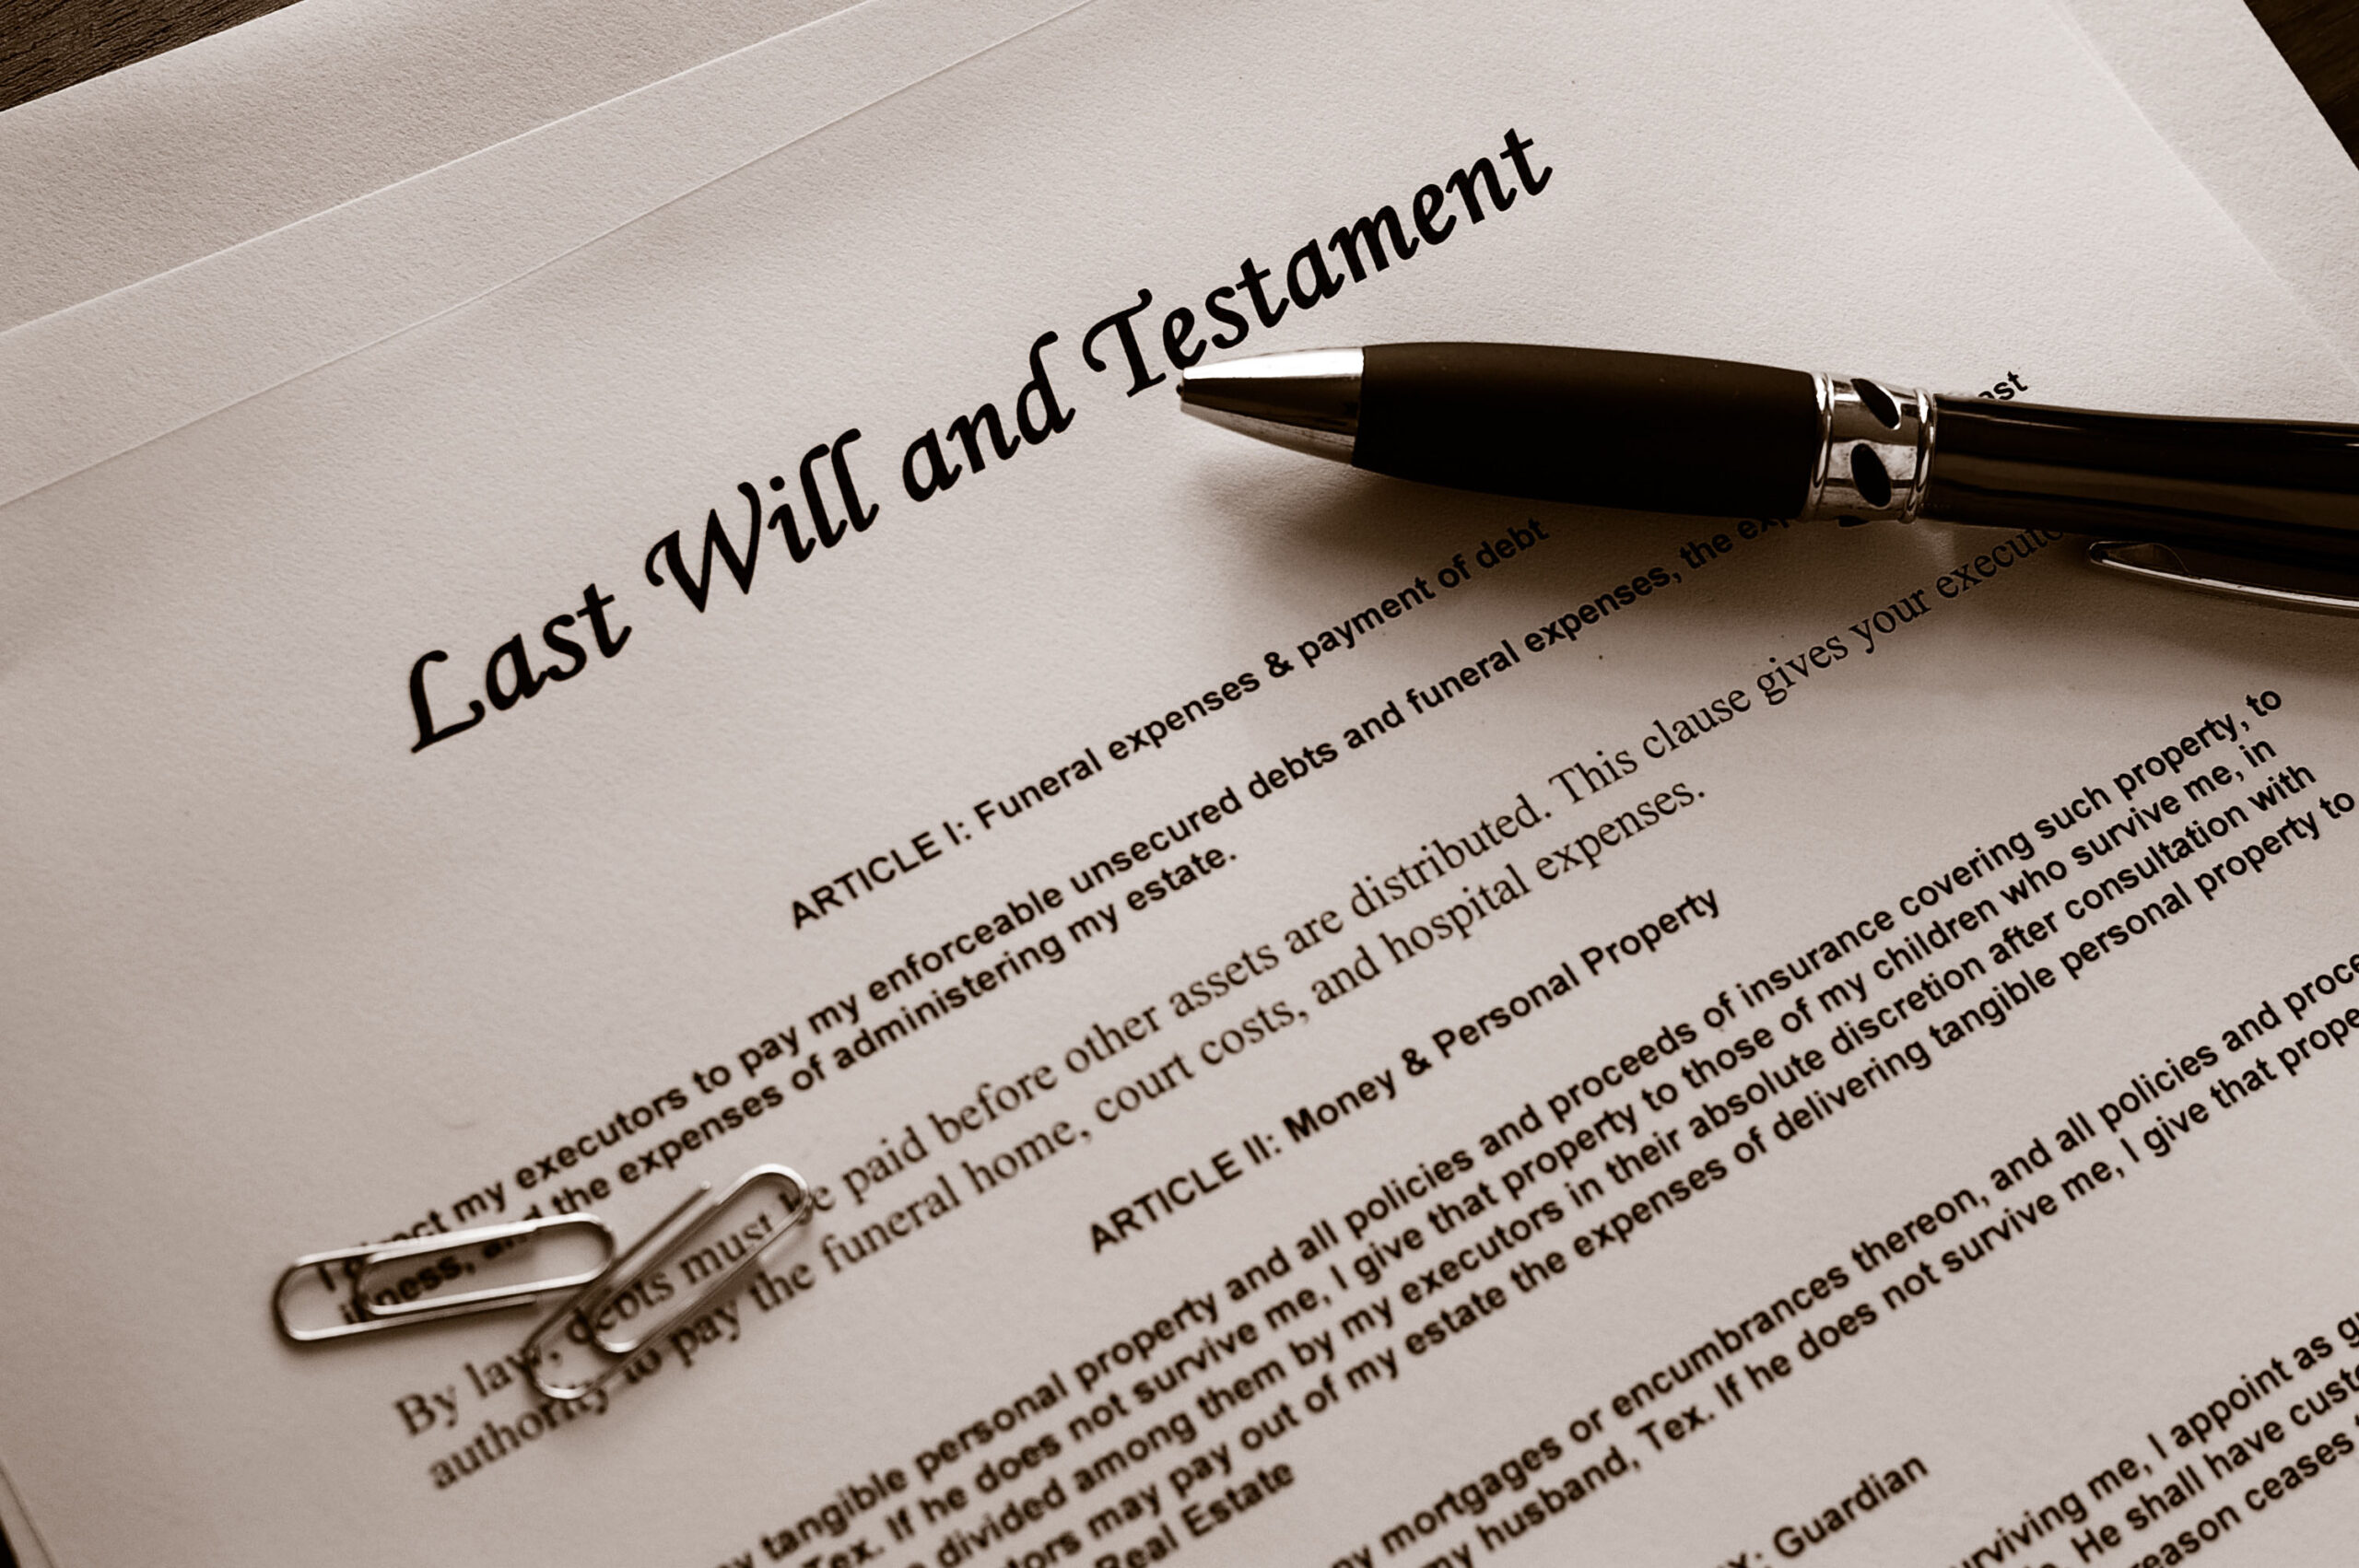 5 Important Things to Consider When Making Your Will